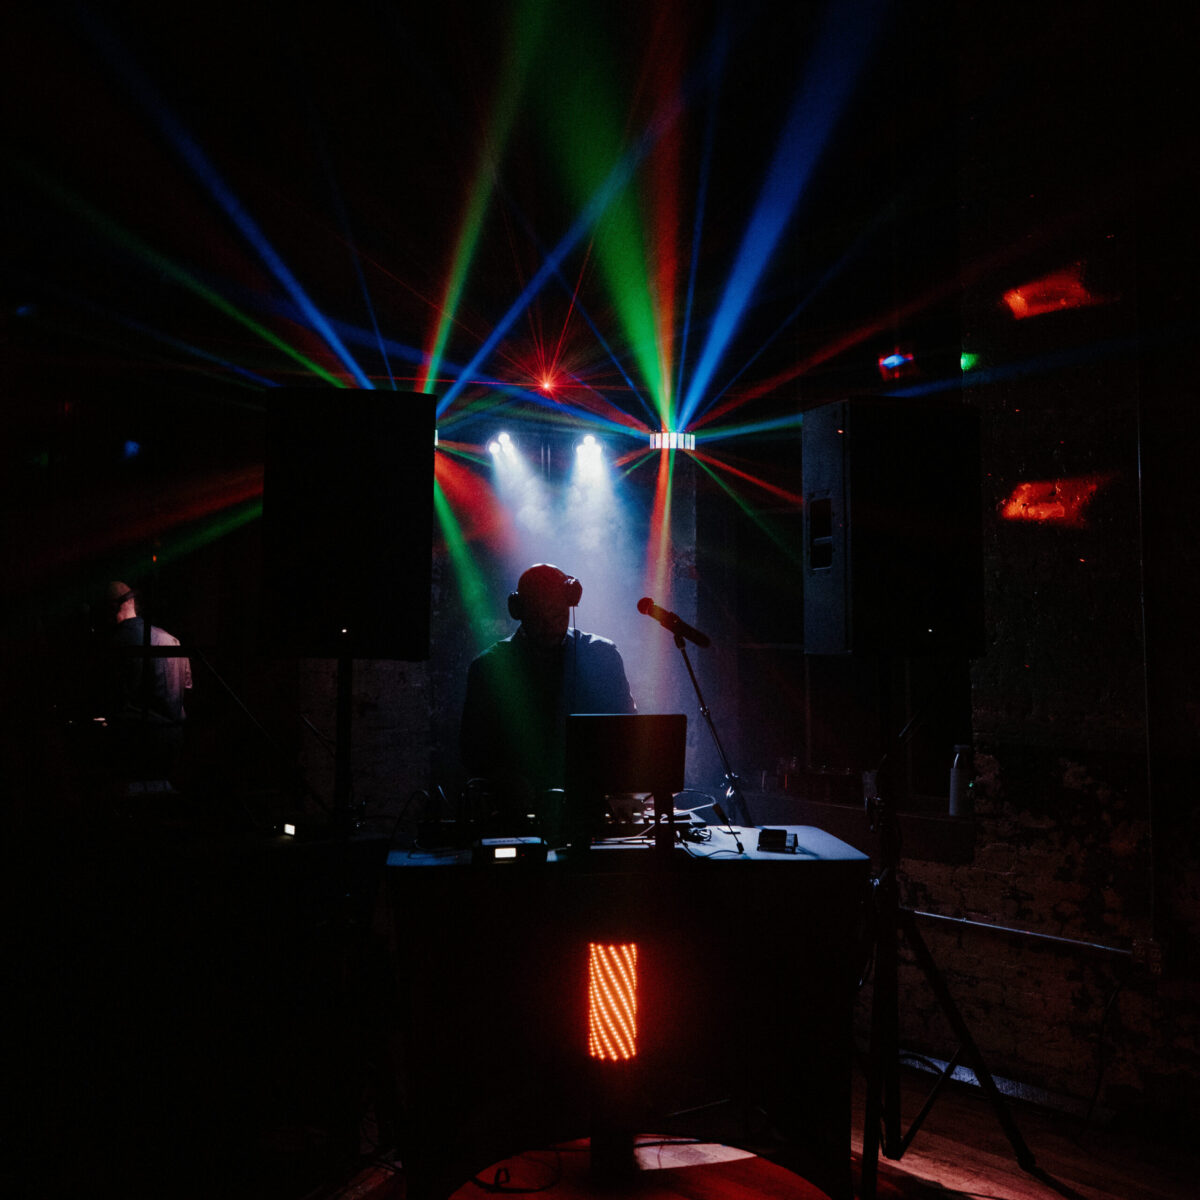 A DJ performs on stage with colorful laser lights and fog effects, surrounded by speakers and music equipment.